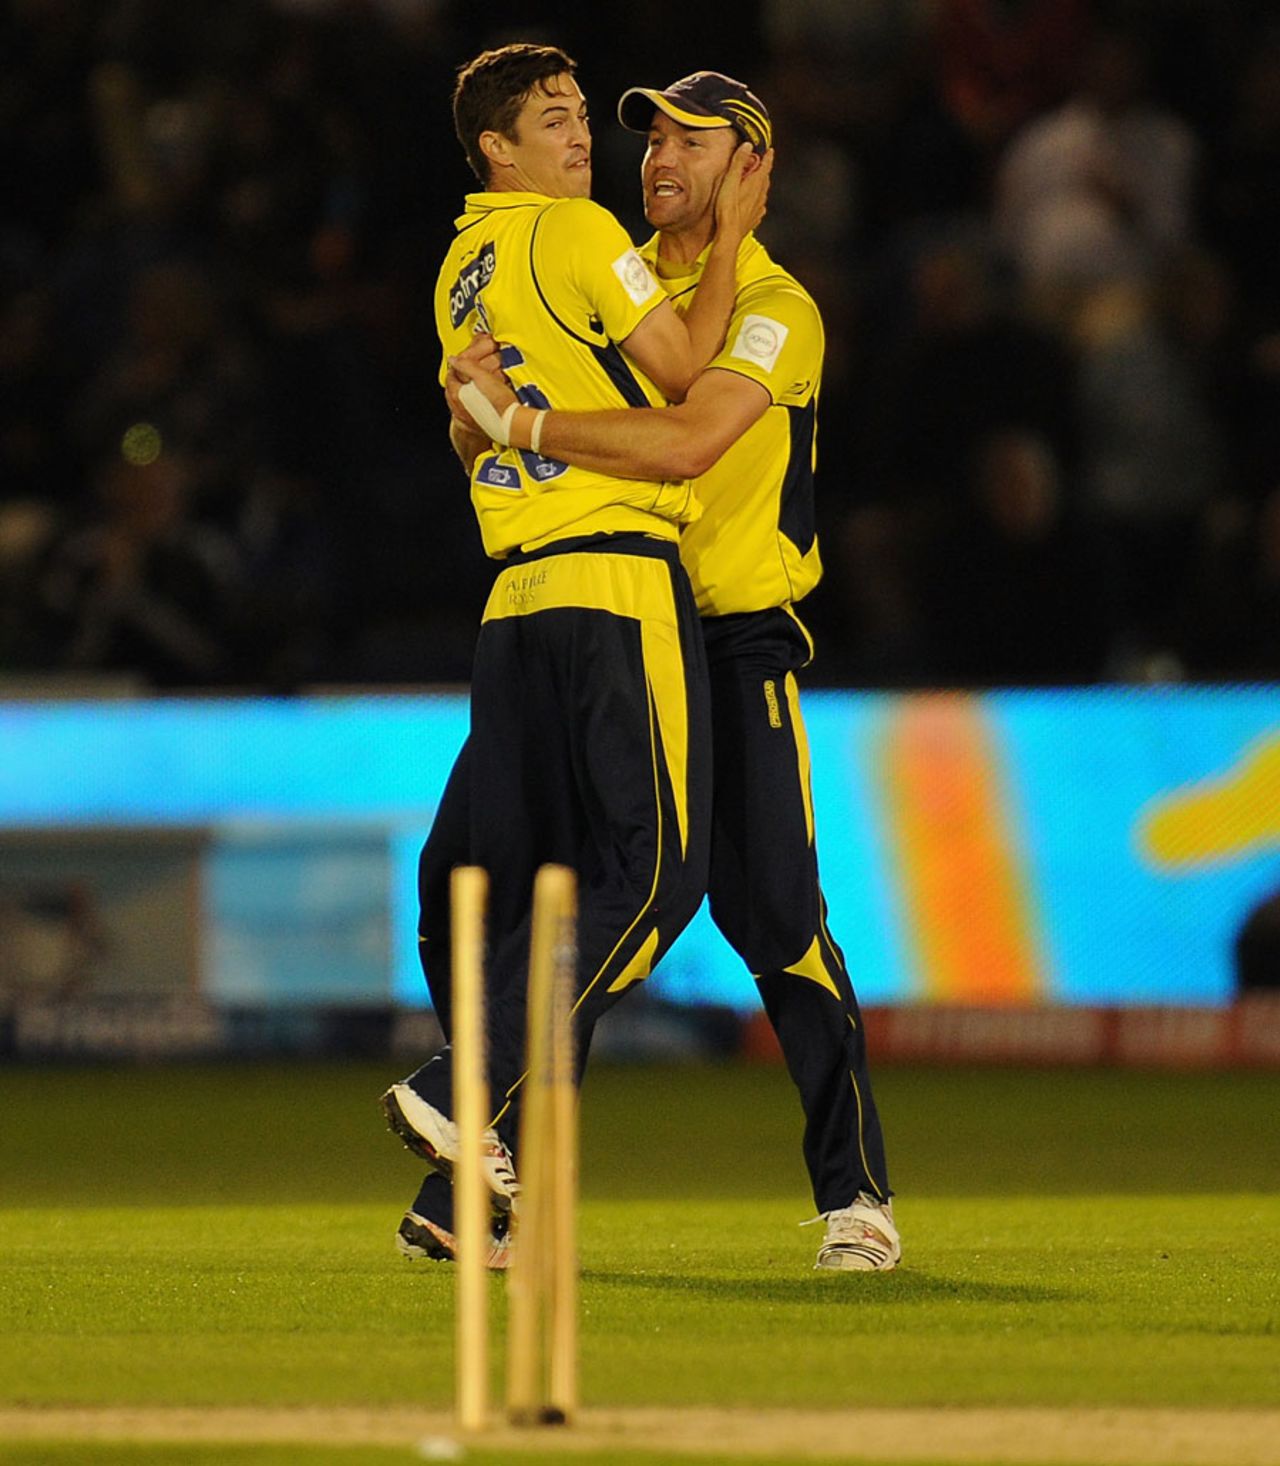 Chris Wood bowled a nerveless final over to seal victory, Yorkshire v Hampshire, Friends Life t20 final, August 25, 2012